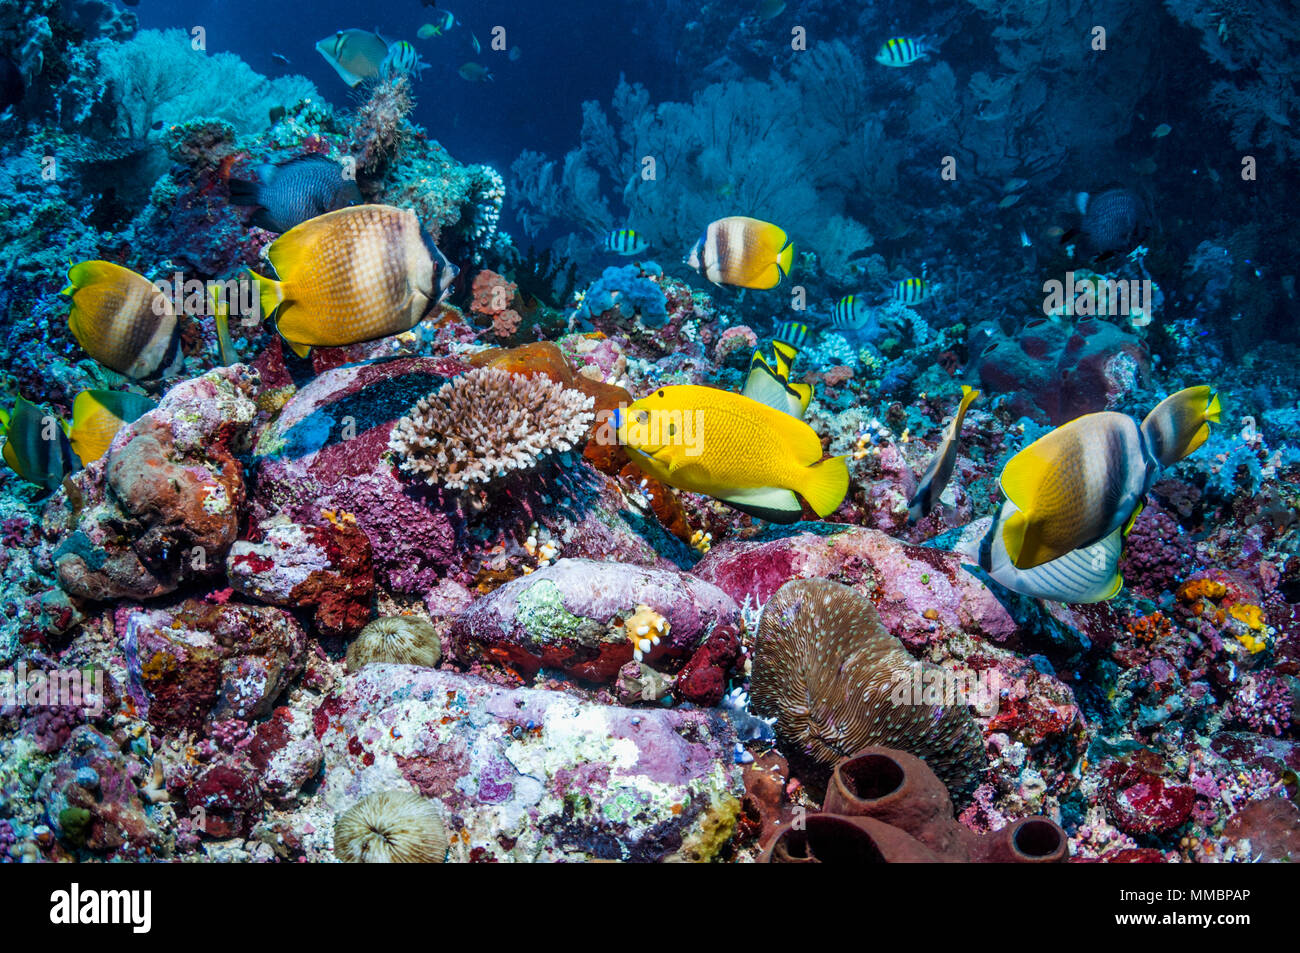 Three-spot angelfish [Apolemichthys trimaculatus] and Klein's butterflyfish [Chaetodon kleinii] on coral reef.  Ambon, Indonesia. Stock Photo